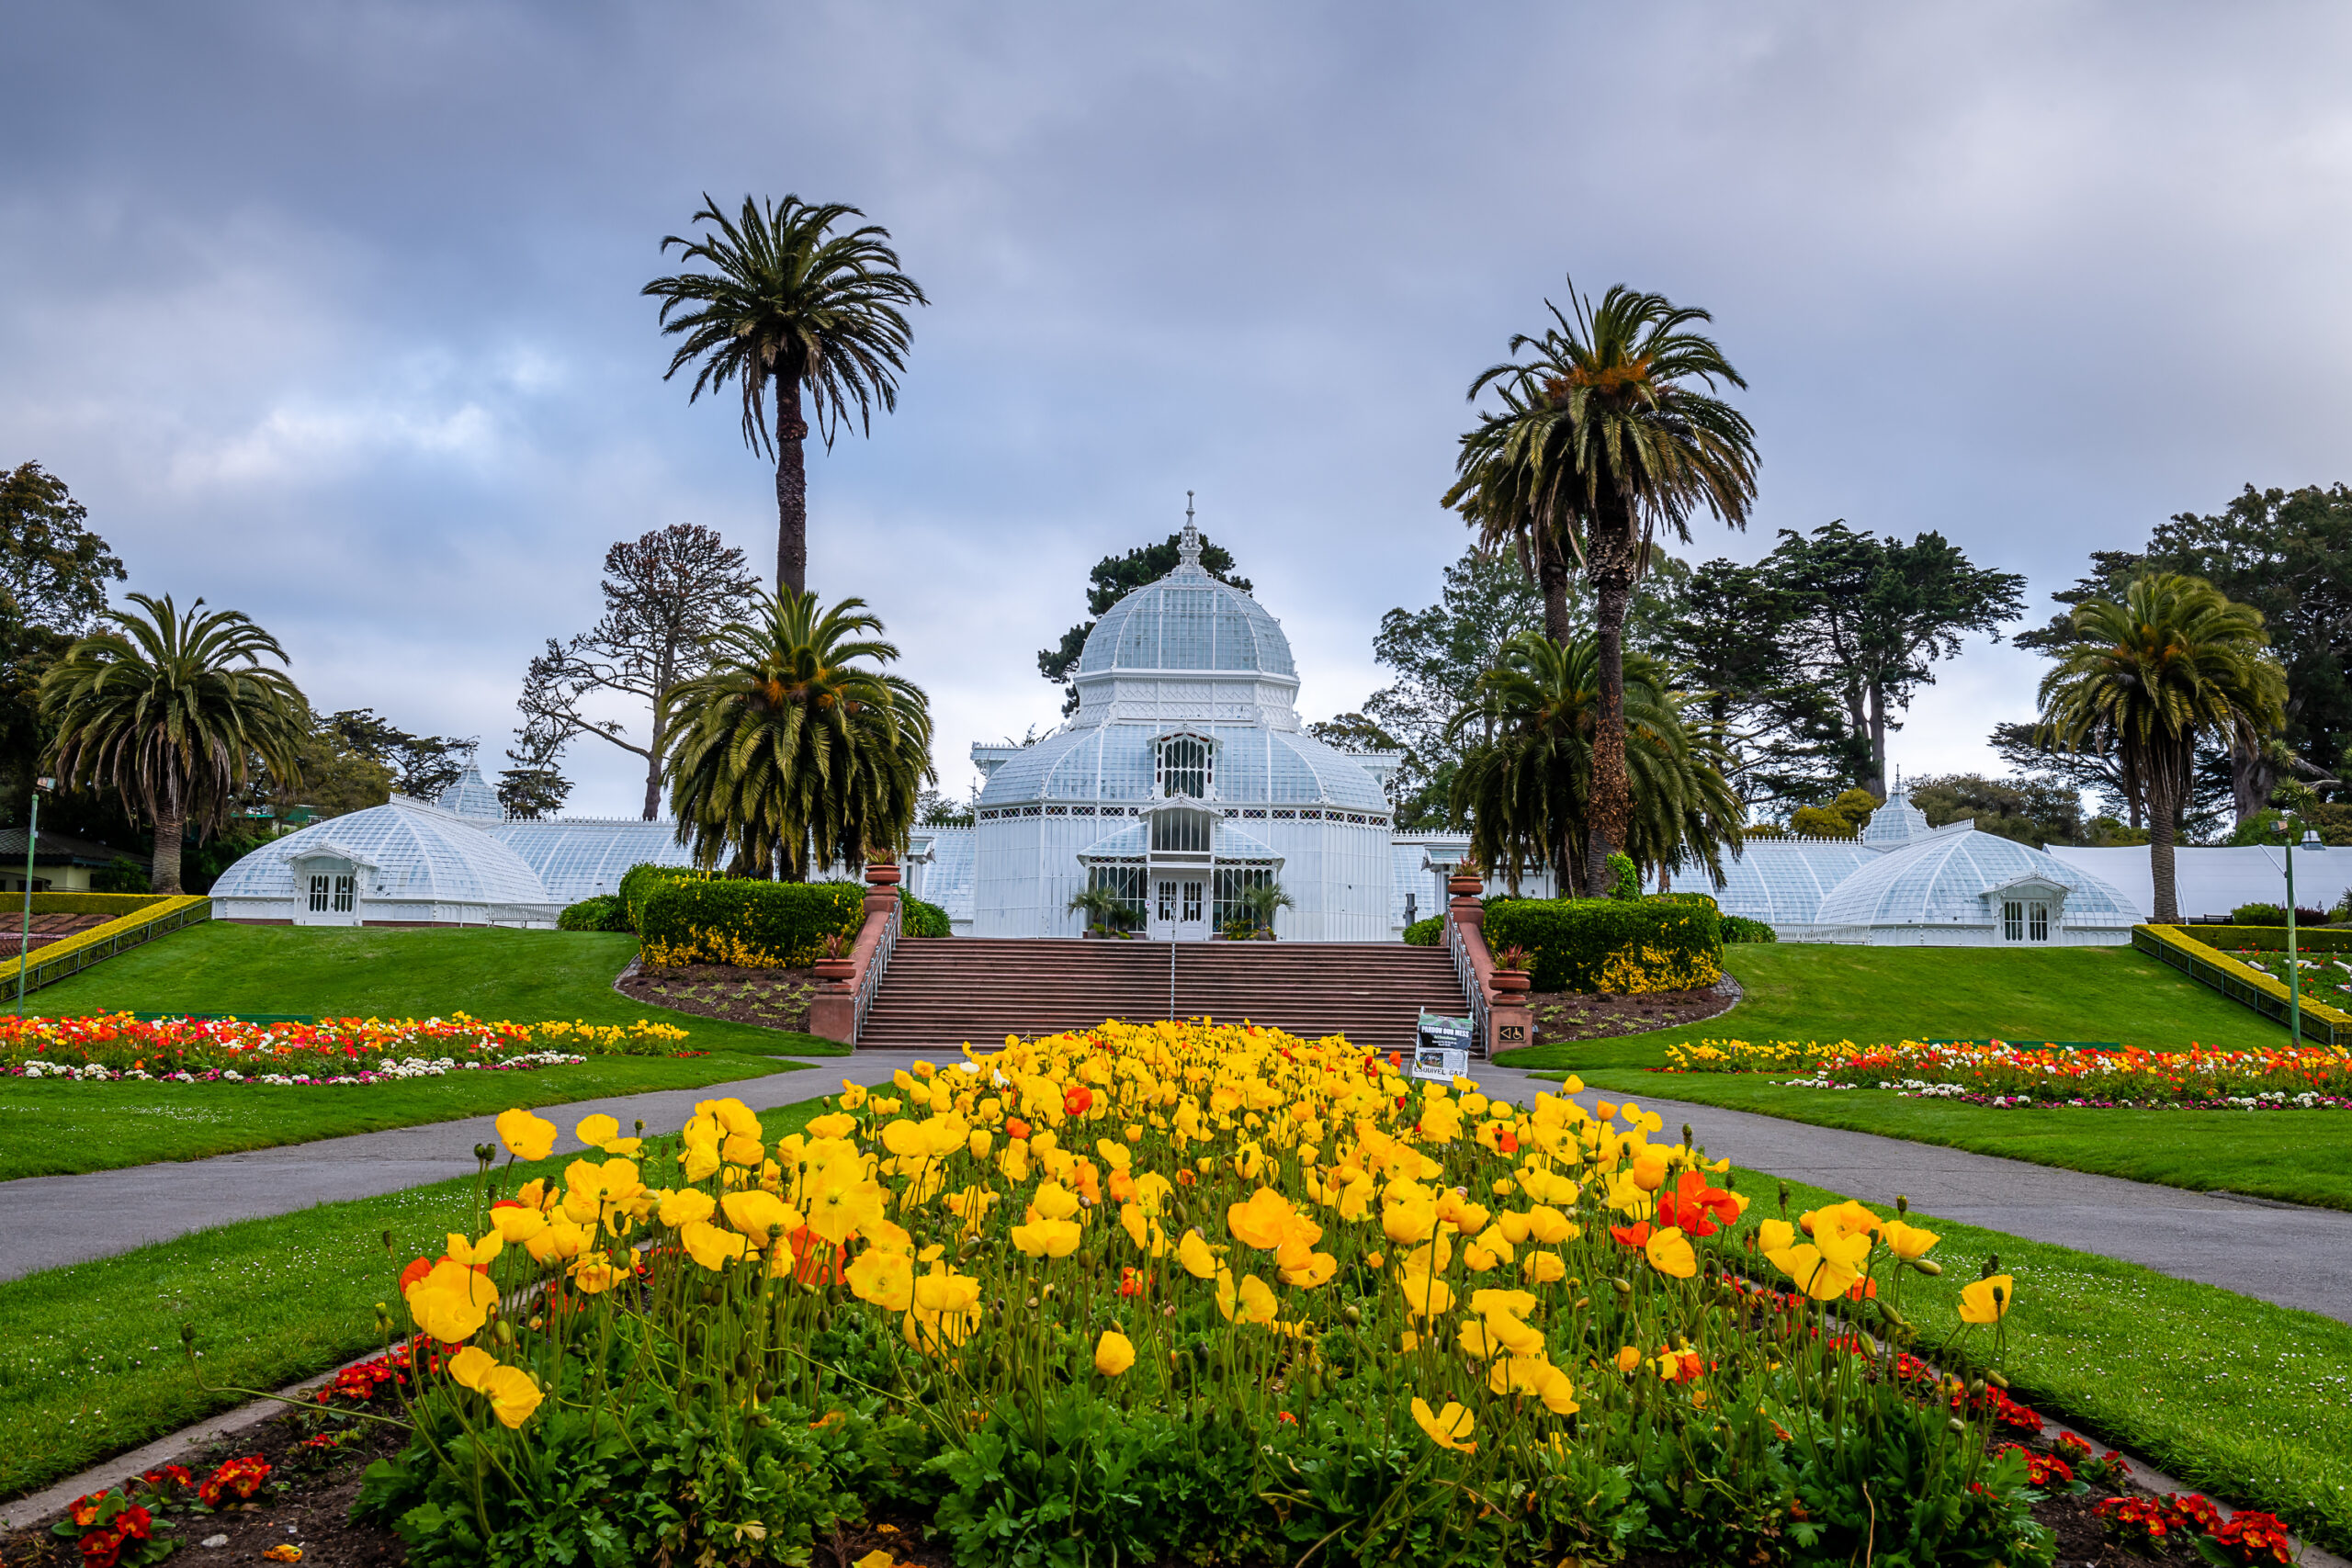 Conservatory of Flowers in Golden Gate Park with yellow tulips in front of the Victorian building